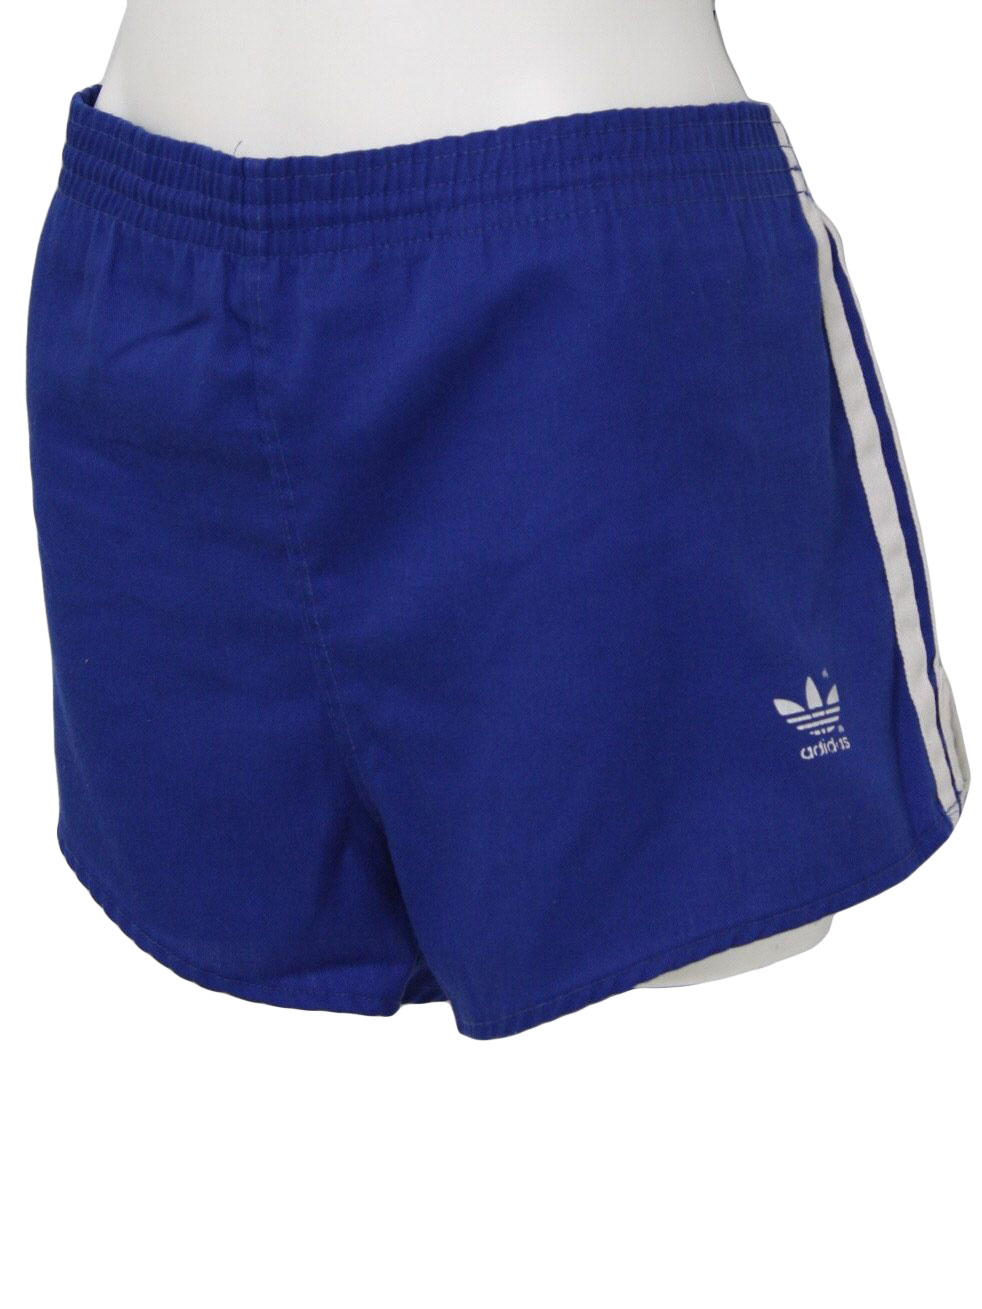 80s Vintage Adidas Shorts: 80s -Adidas- Mens blue and white polyester ...